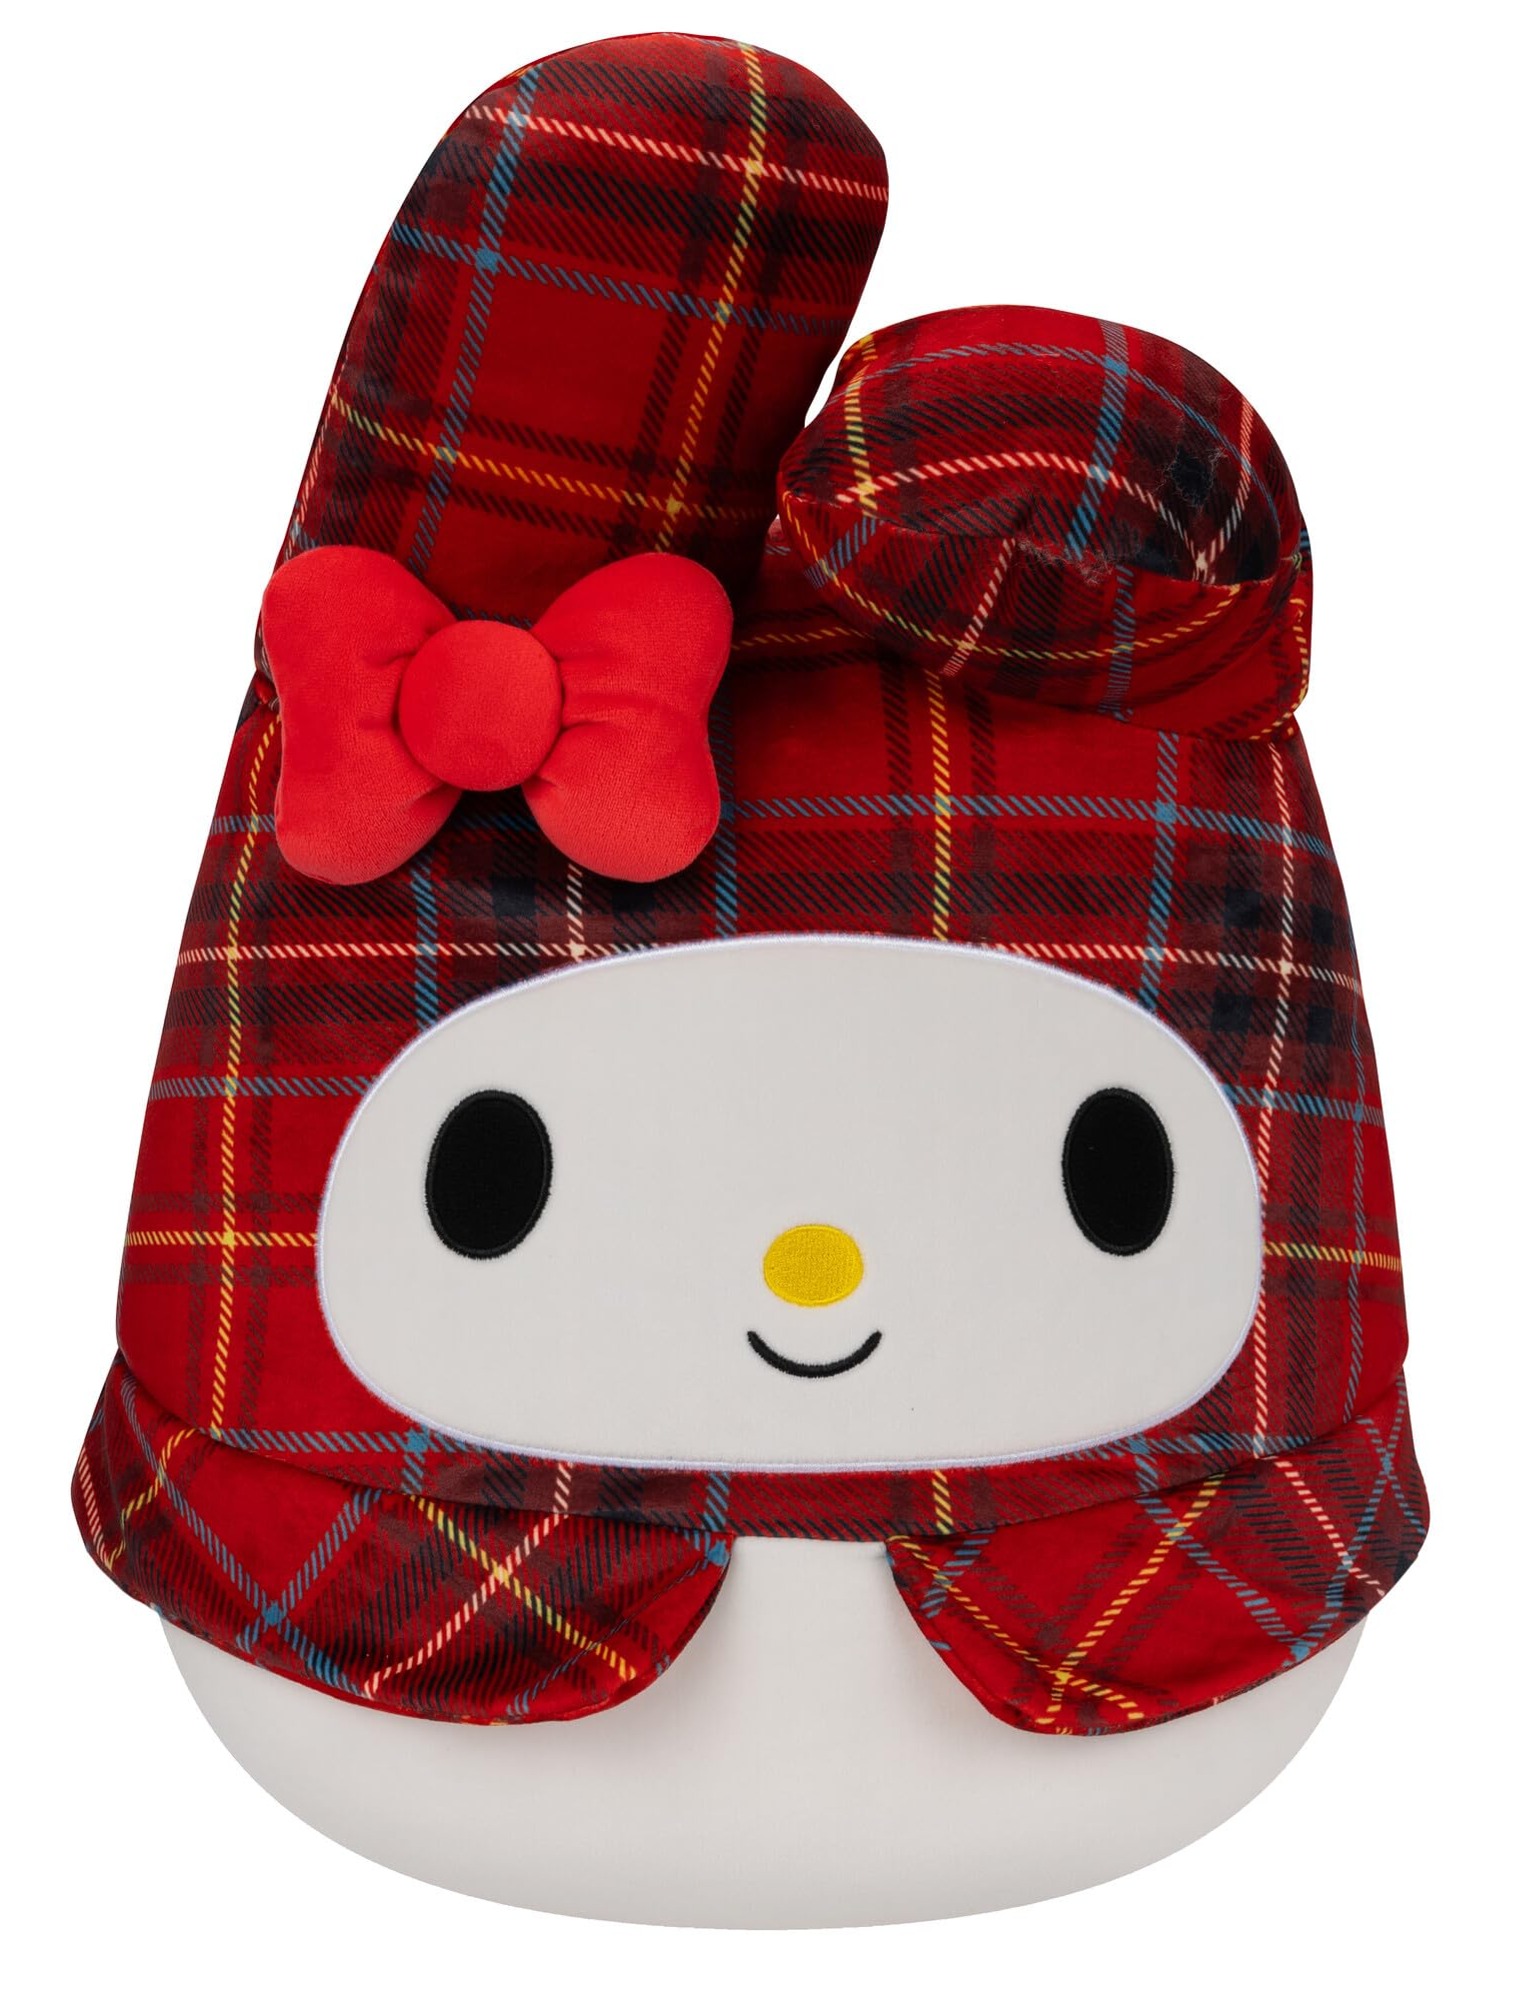 14" Squishmallows Sanrio Red Plaid My Melody Plush Toy $13.36 + Free Shipping w/ Prime or on $35+